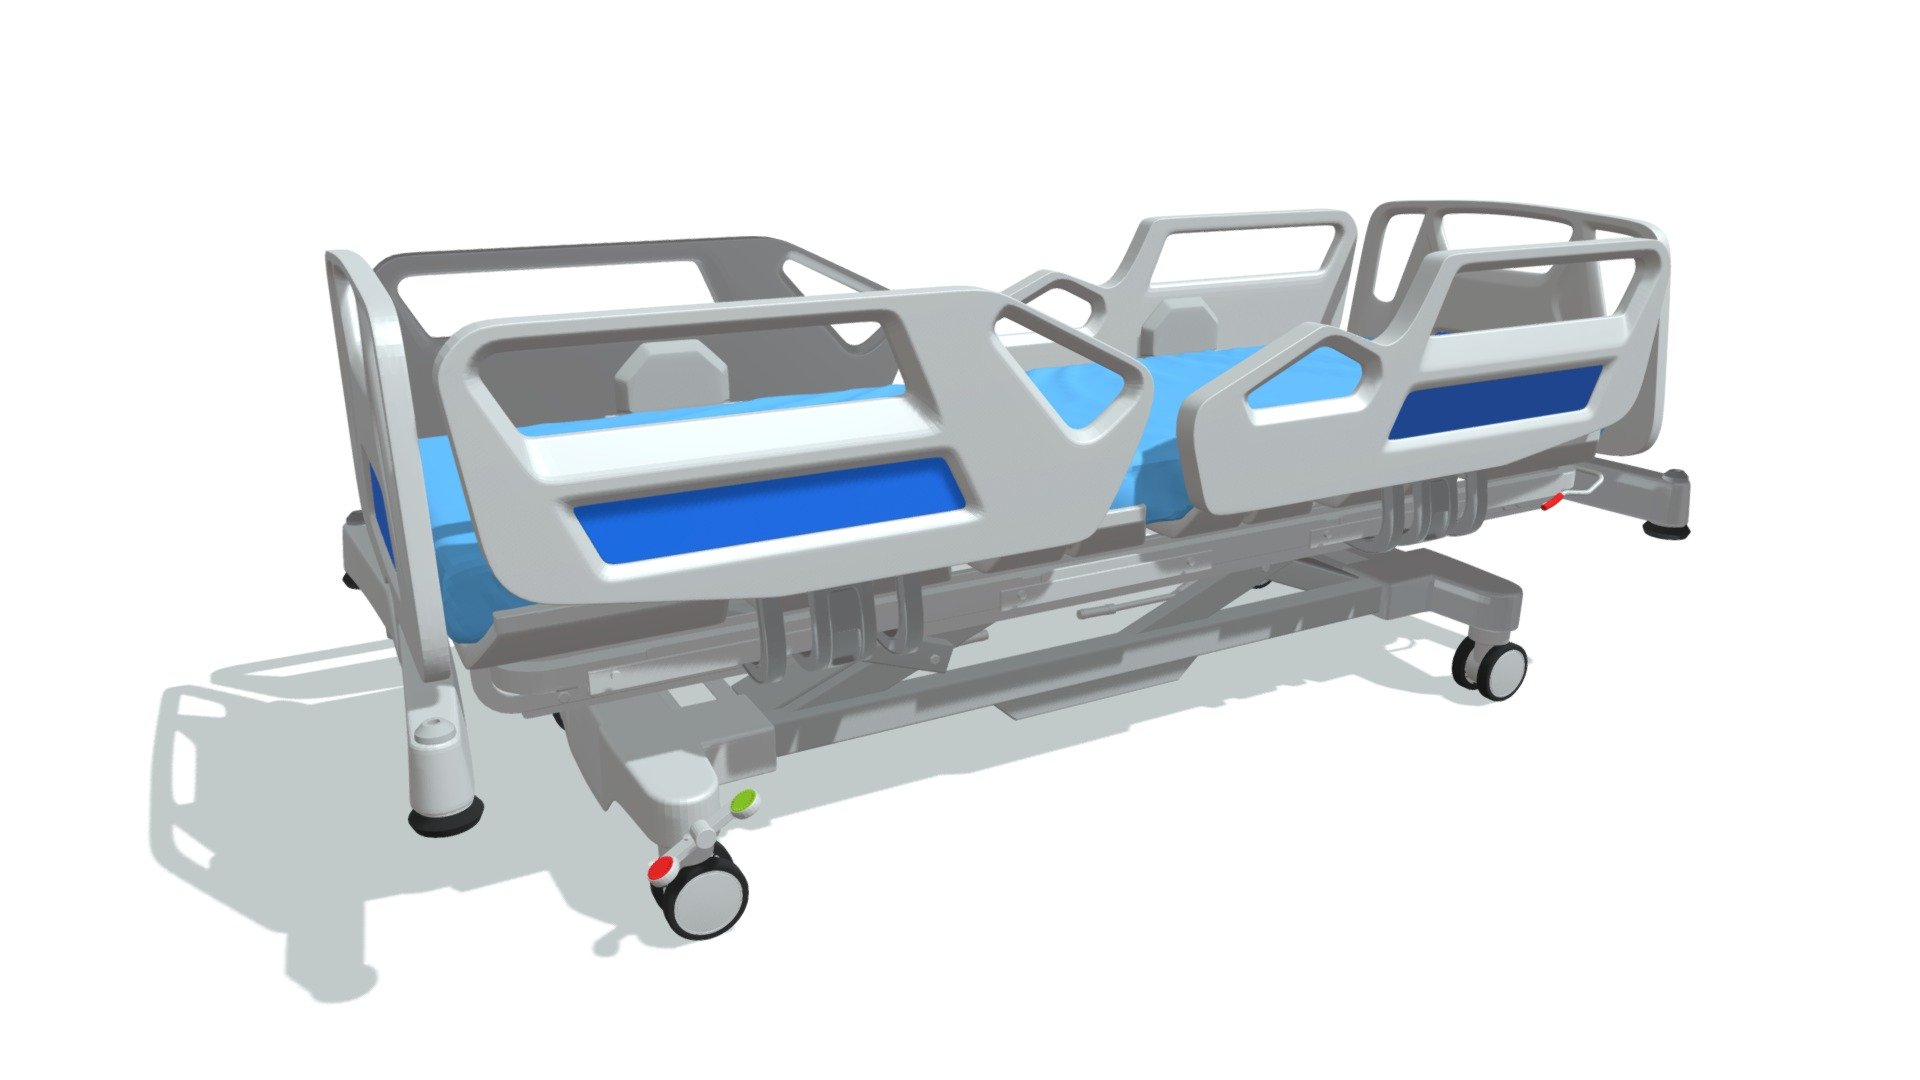 High quality 3d model of hospital medical bed.
Colors can be easily modified 3d model